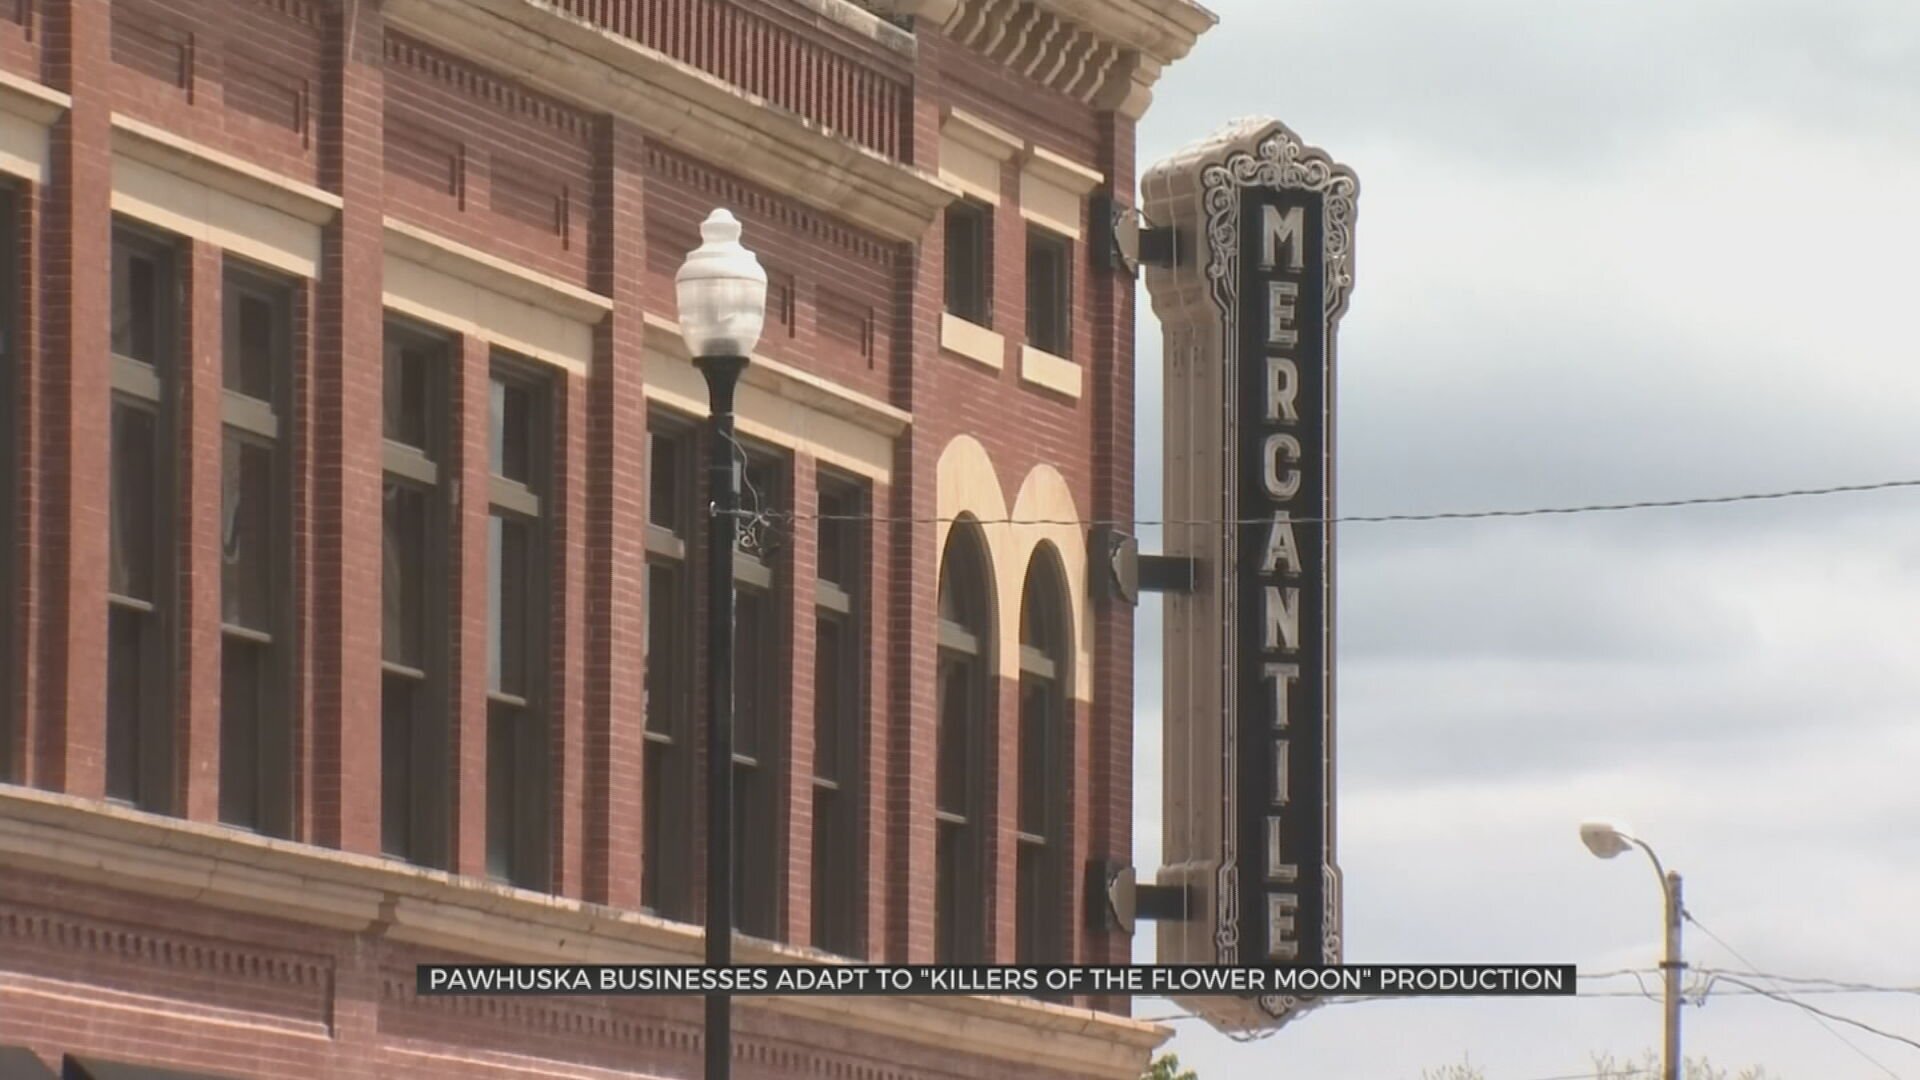 Pawhuska Businesses Adapt To ‘Killers Of The Flower Moon’ Production 